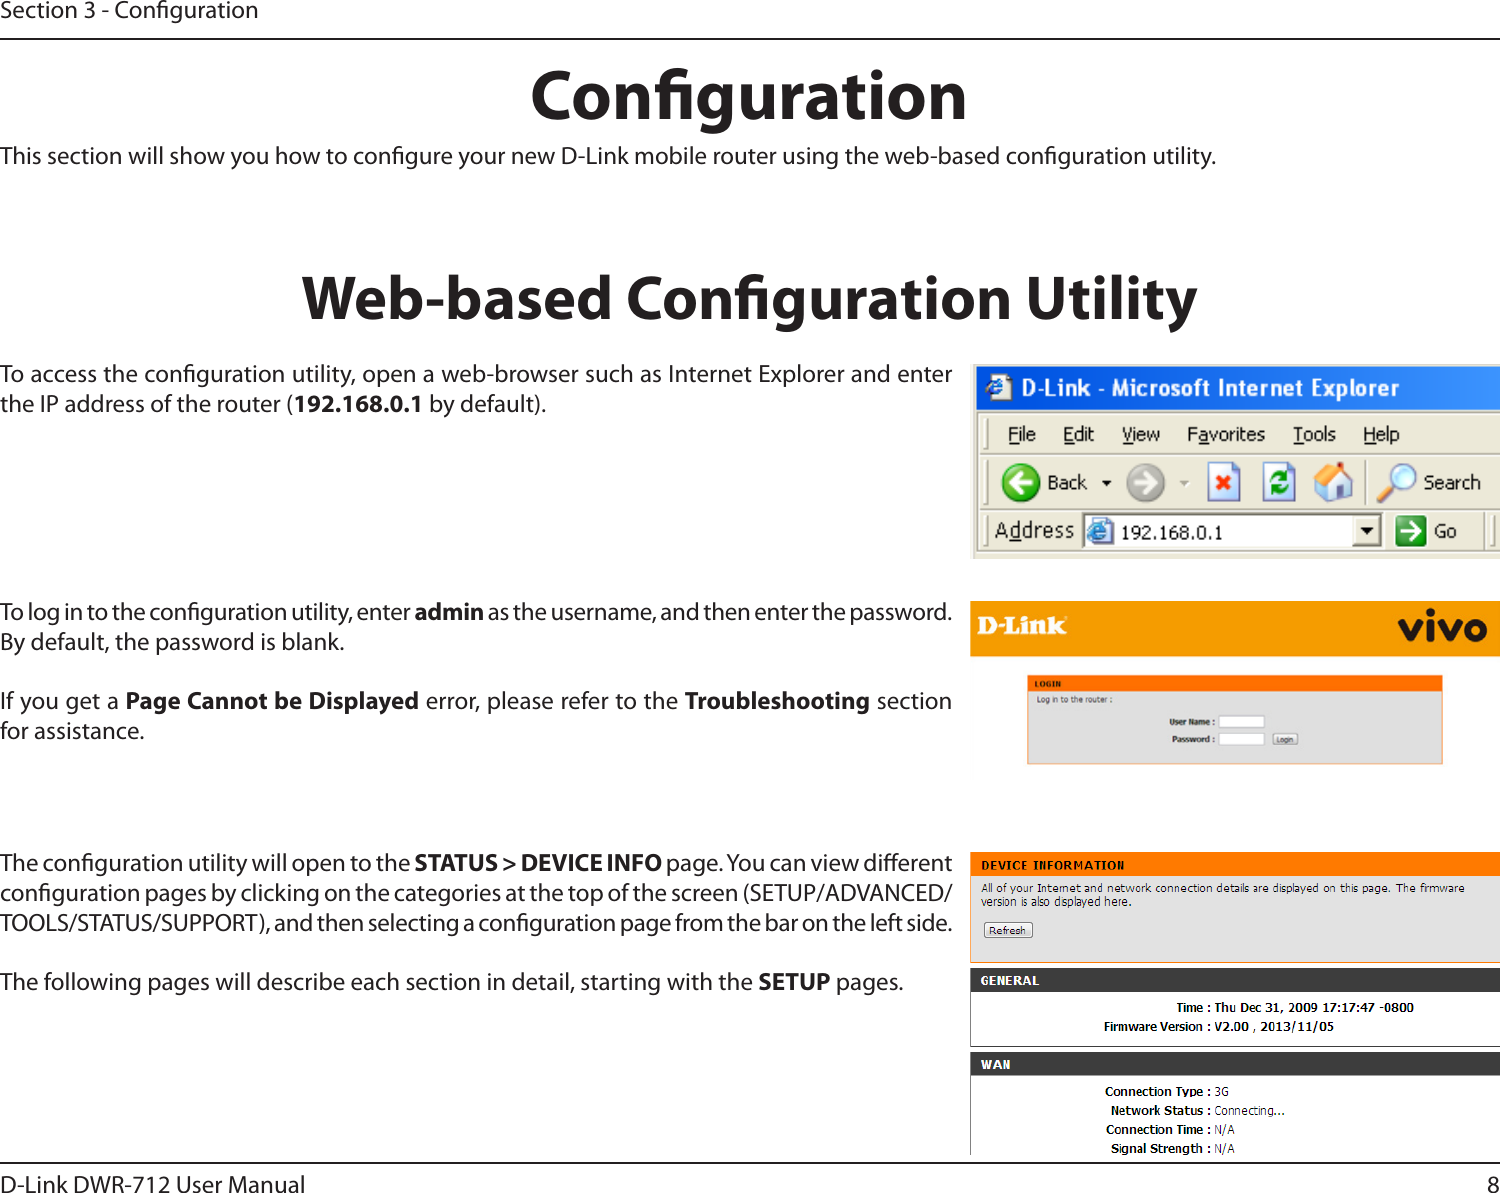 8D-Link DWR-712 User ManualSection 3 - CongurationCongurationThis section will show you how to congure your new D-Link mobile router using the web-based conguration utility.Web-based Conguration UtilityTo access the conguration utility, open a web-browser such as Internet Explorer and enter the IP address of the router (192.168.0.1 by default).To log in to the conguration utility, enter admin as the username, and then enter the password. By default, the password is blank.If you get a Page Cannot be Displayed error, please refer to the Troubleshooting section for assistance.The conguration utility will open to the STATUS &gt; DEVICE INFO page. You can view dierent conguration pages by clicking on the categories at the top of the screen (SETUP/ADVANCED/TOOLS/STATUS/SUPPORT), and then selecting a conguration page from the bar on the left side.The following pages will describe each section in detail, starting with the SETUP pages.